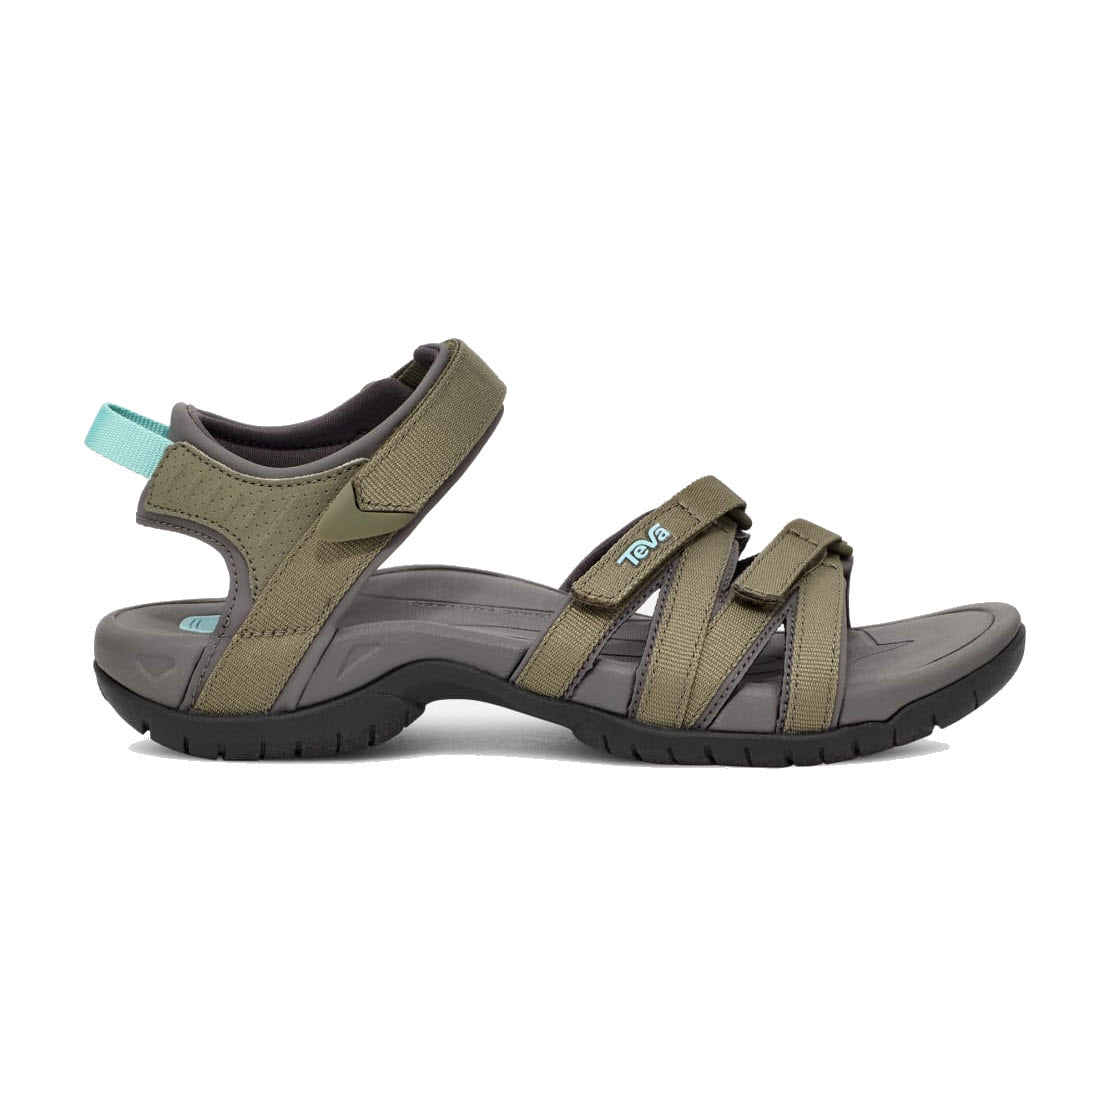 A pair of burnt olive women&#39;s Teva Tirra sandals with adjustable straps and a black sole, shown against a white background.